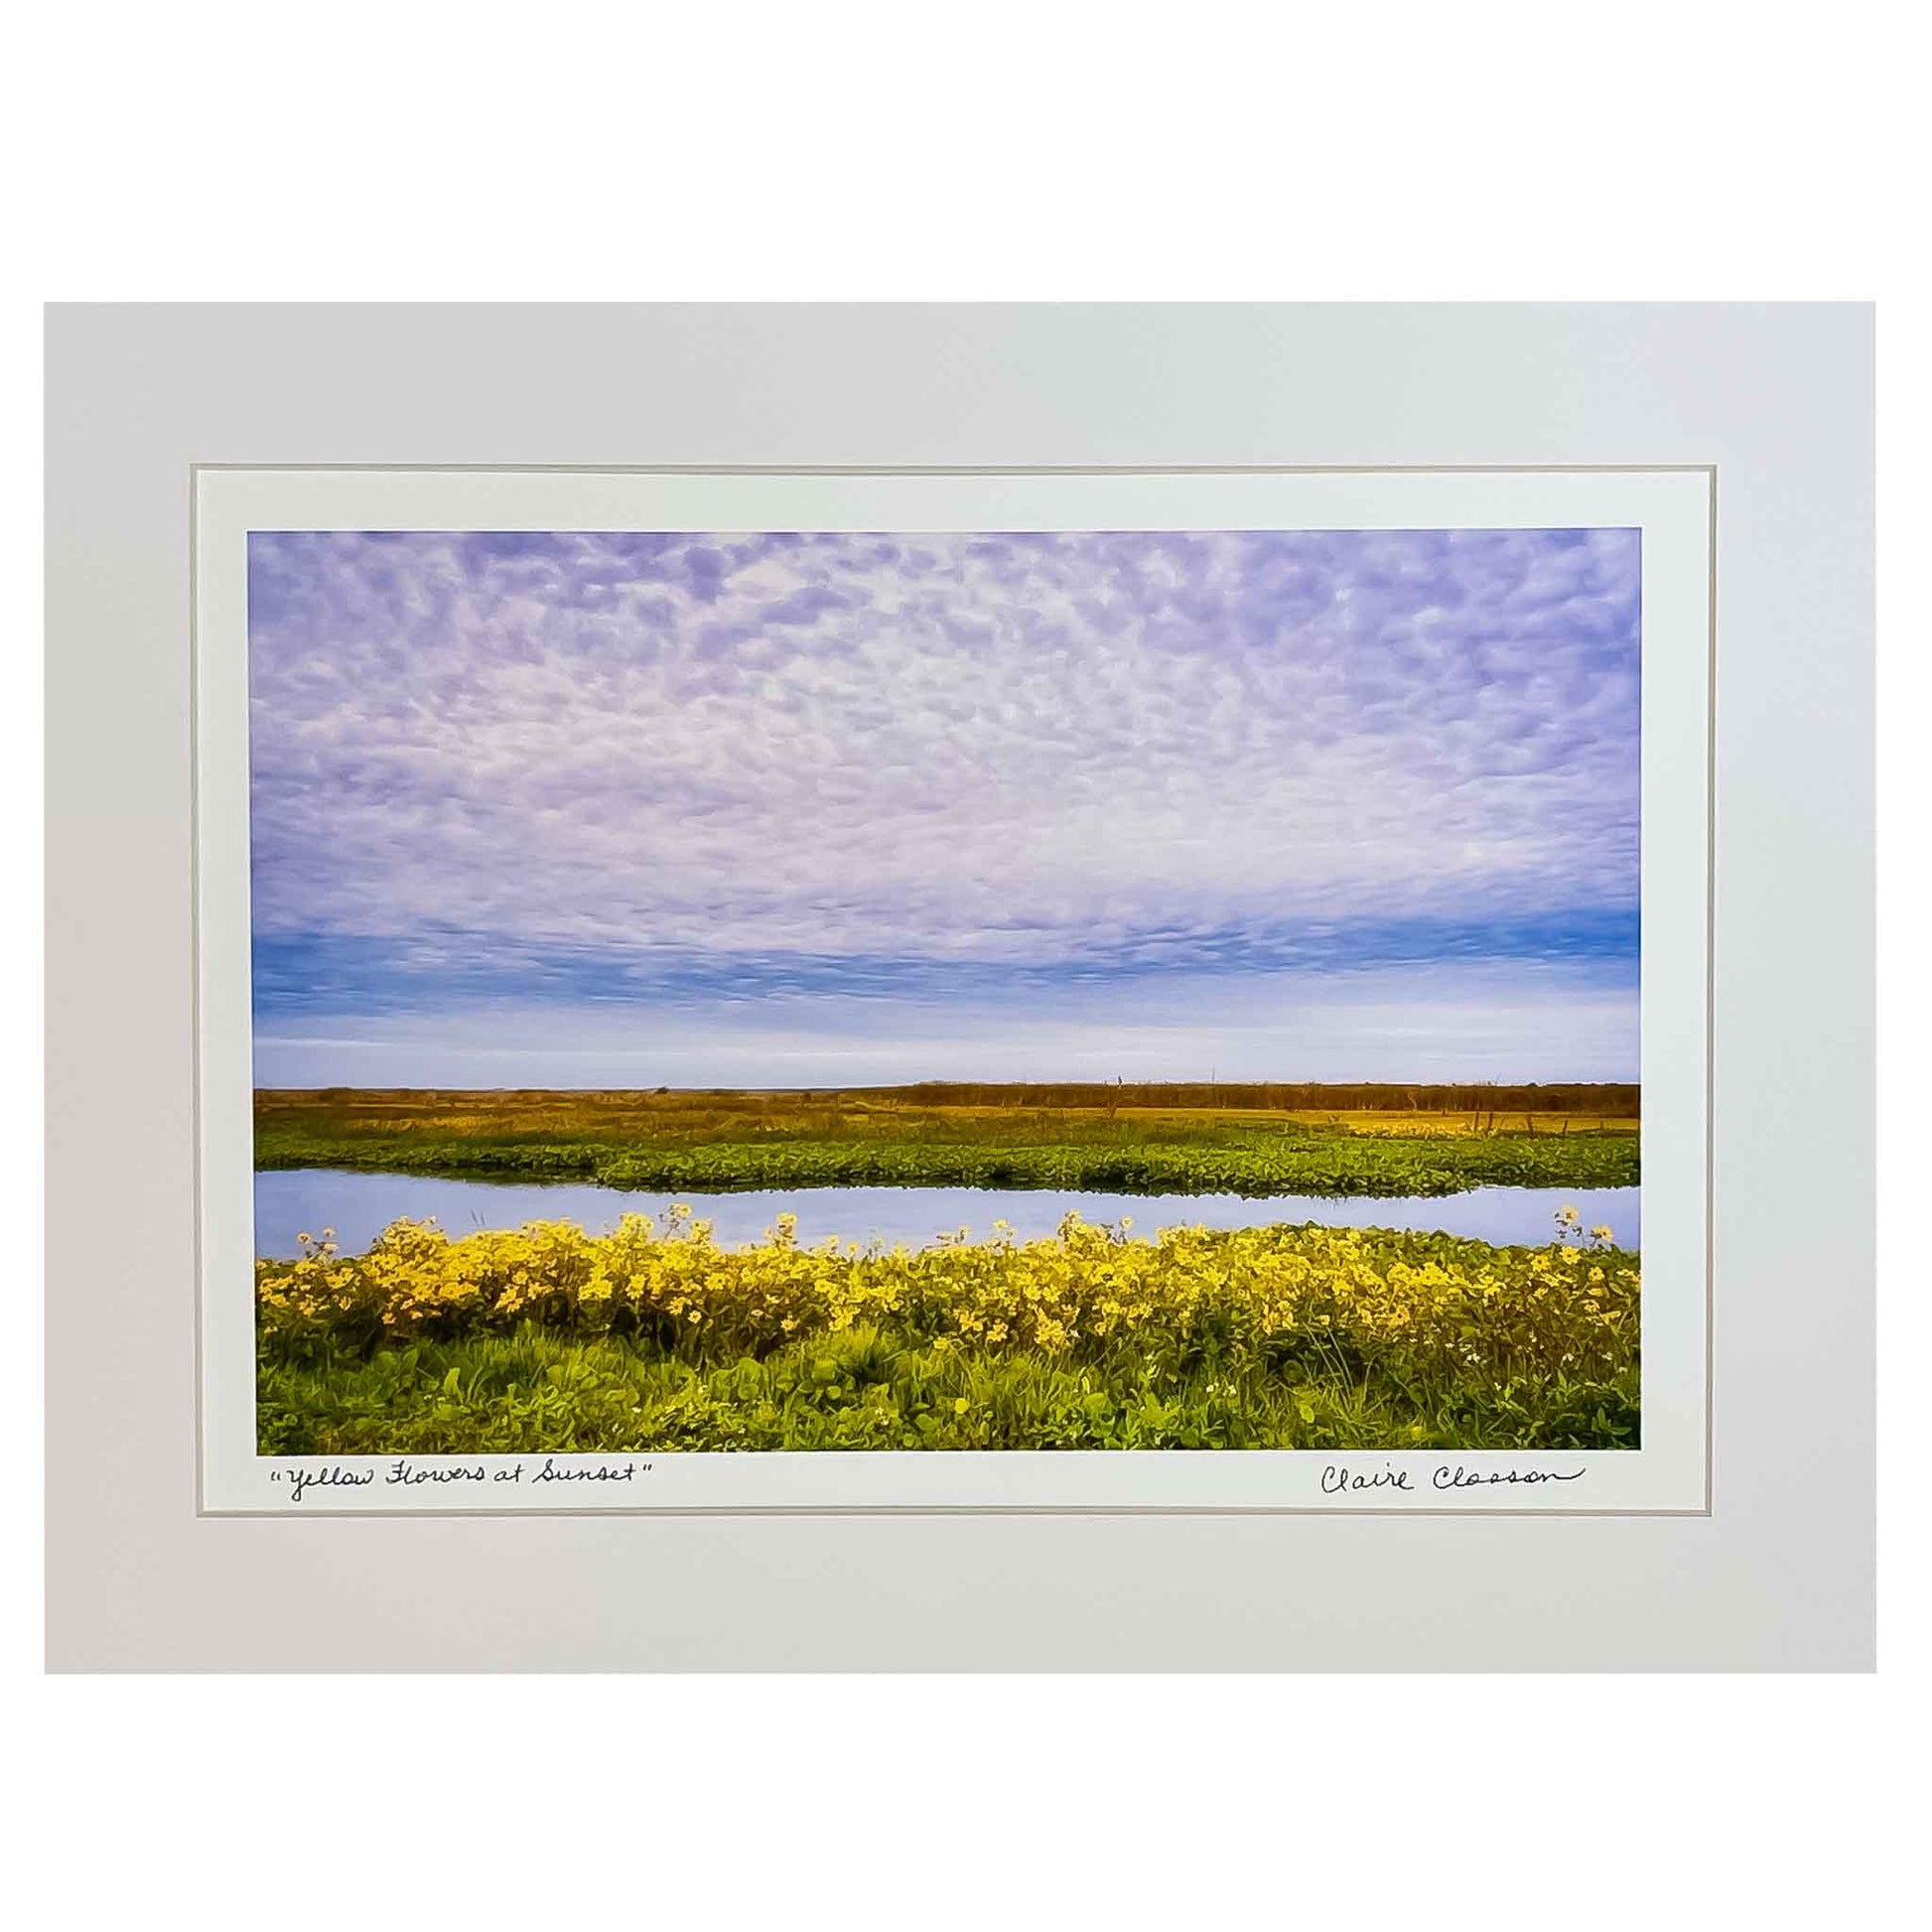 ECC "Yellow Flowers at Sunset" Matted Print is a print of an original photograph by photographer Claire Closson. A tranquil view of yellow flowers in a marsh with a clear stream running through the middle. Beautiful wispy white clouds in a violet sky. 16 x 20 inches matted print on a foam board back. Ready to frame.